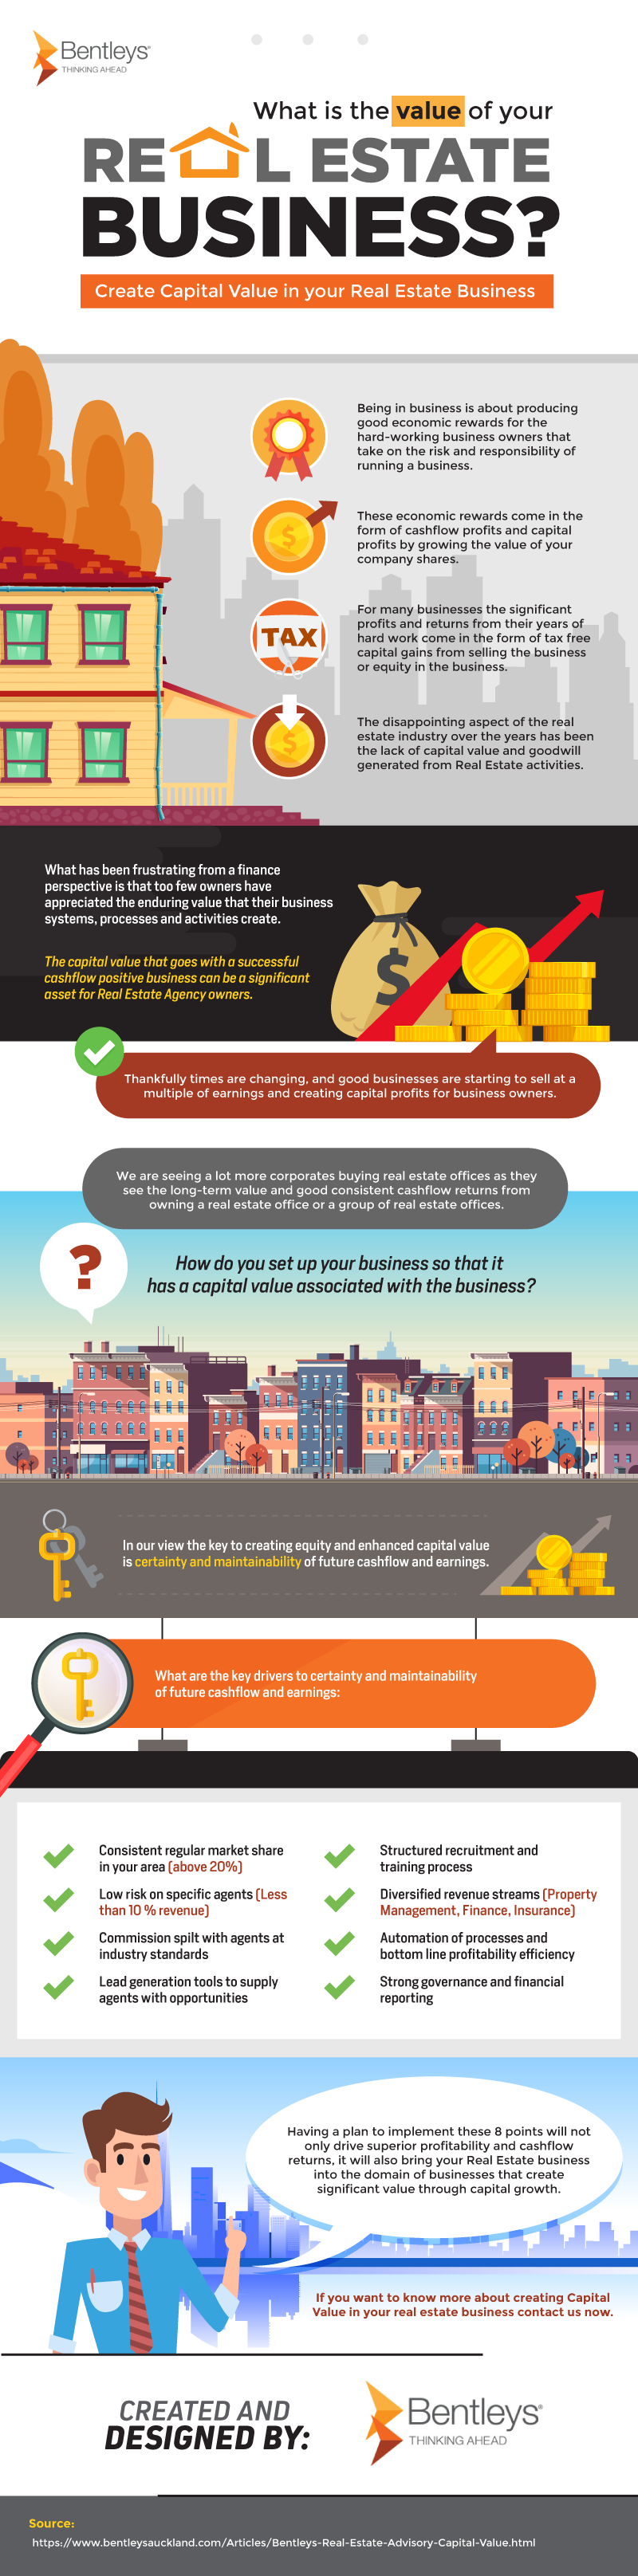 What is the Value of Your Real Estate Business? - Infographic